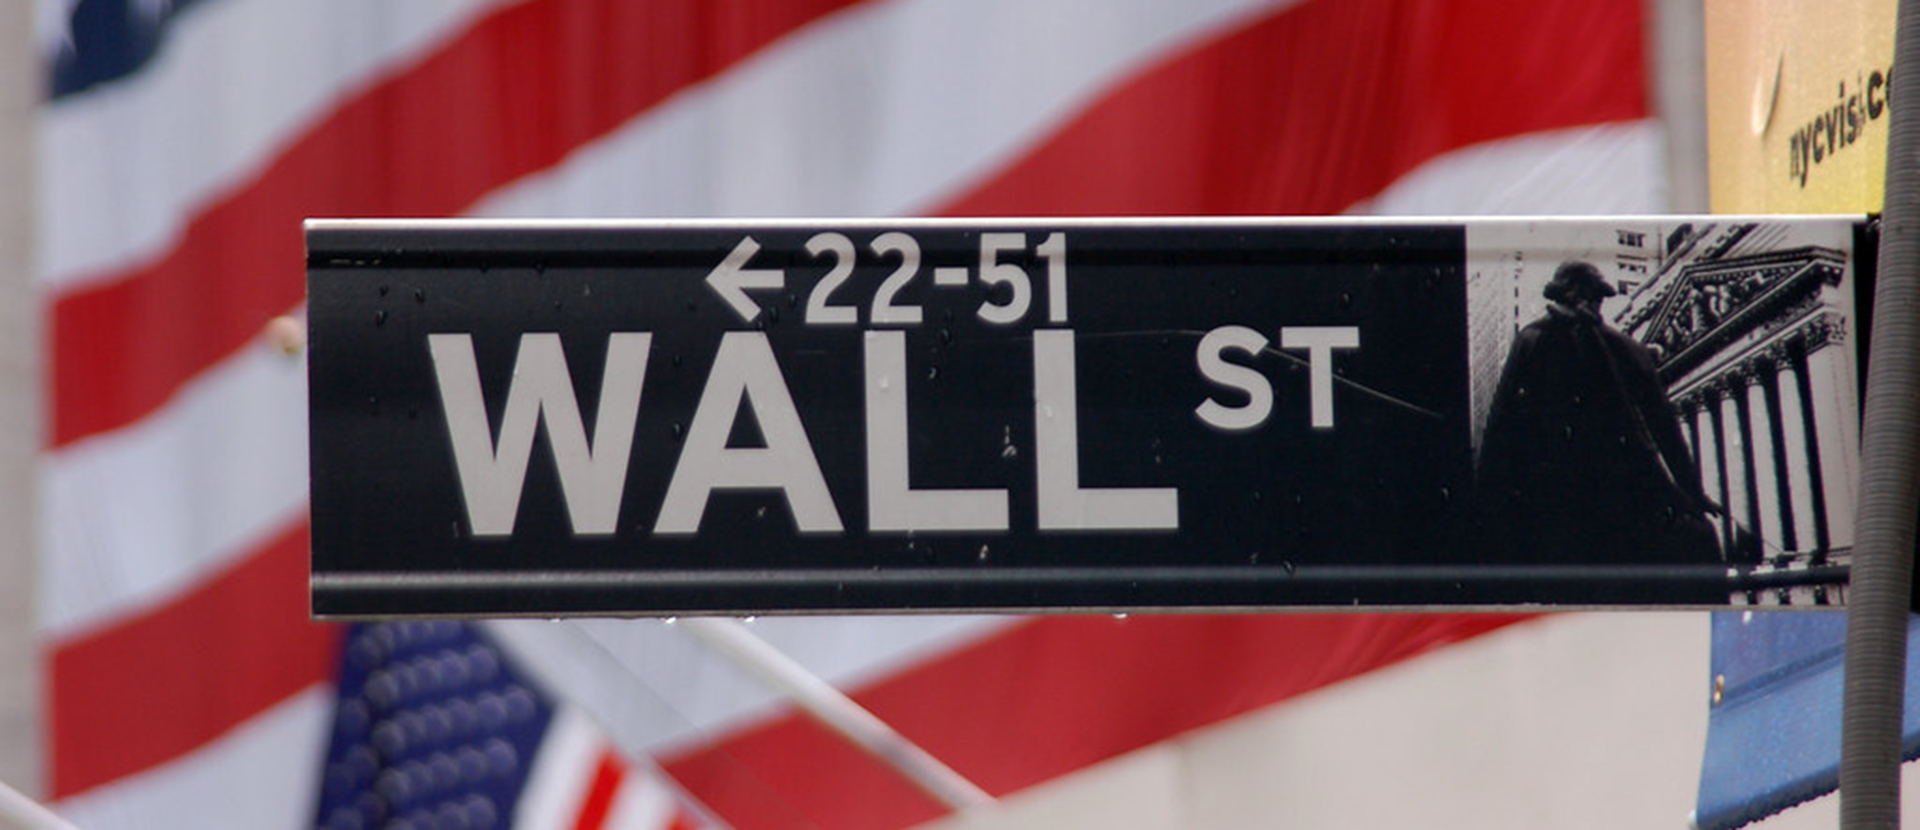 Wall St US Flag event banner